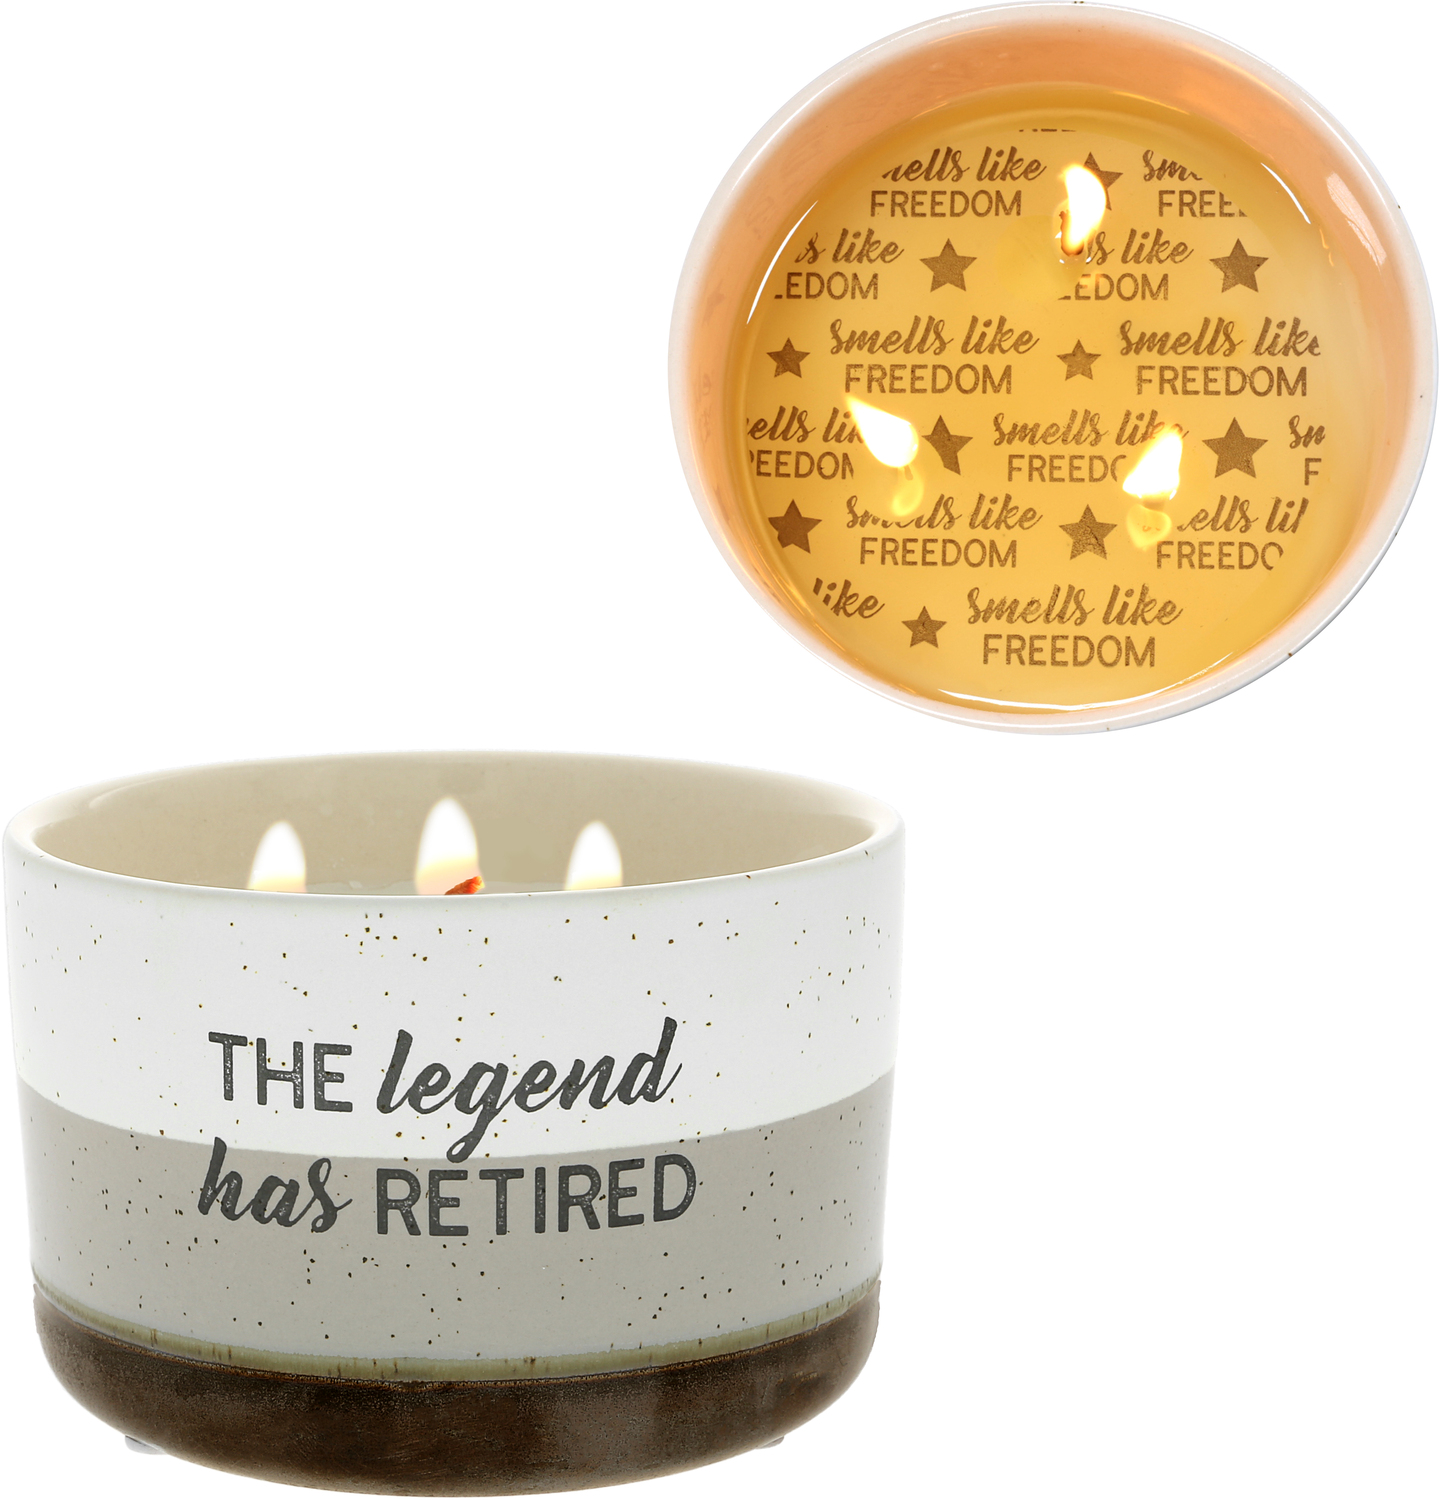 The Legend by Retired Life - The Legend - 12 oz - 100% Soy Wax Reveal Triple Wick Candle
Scent: Tranquility